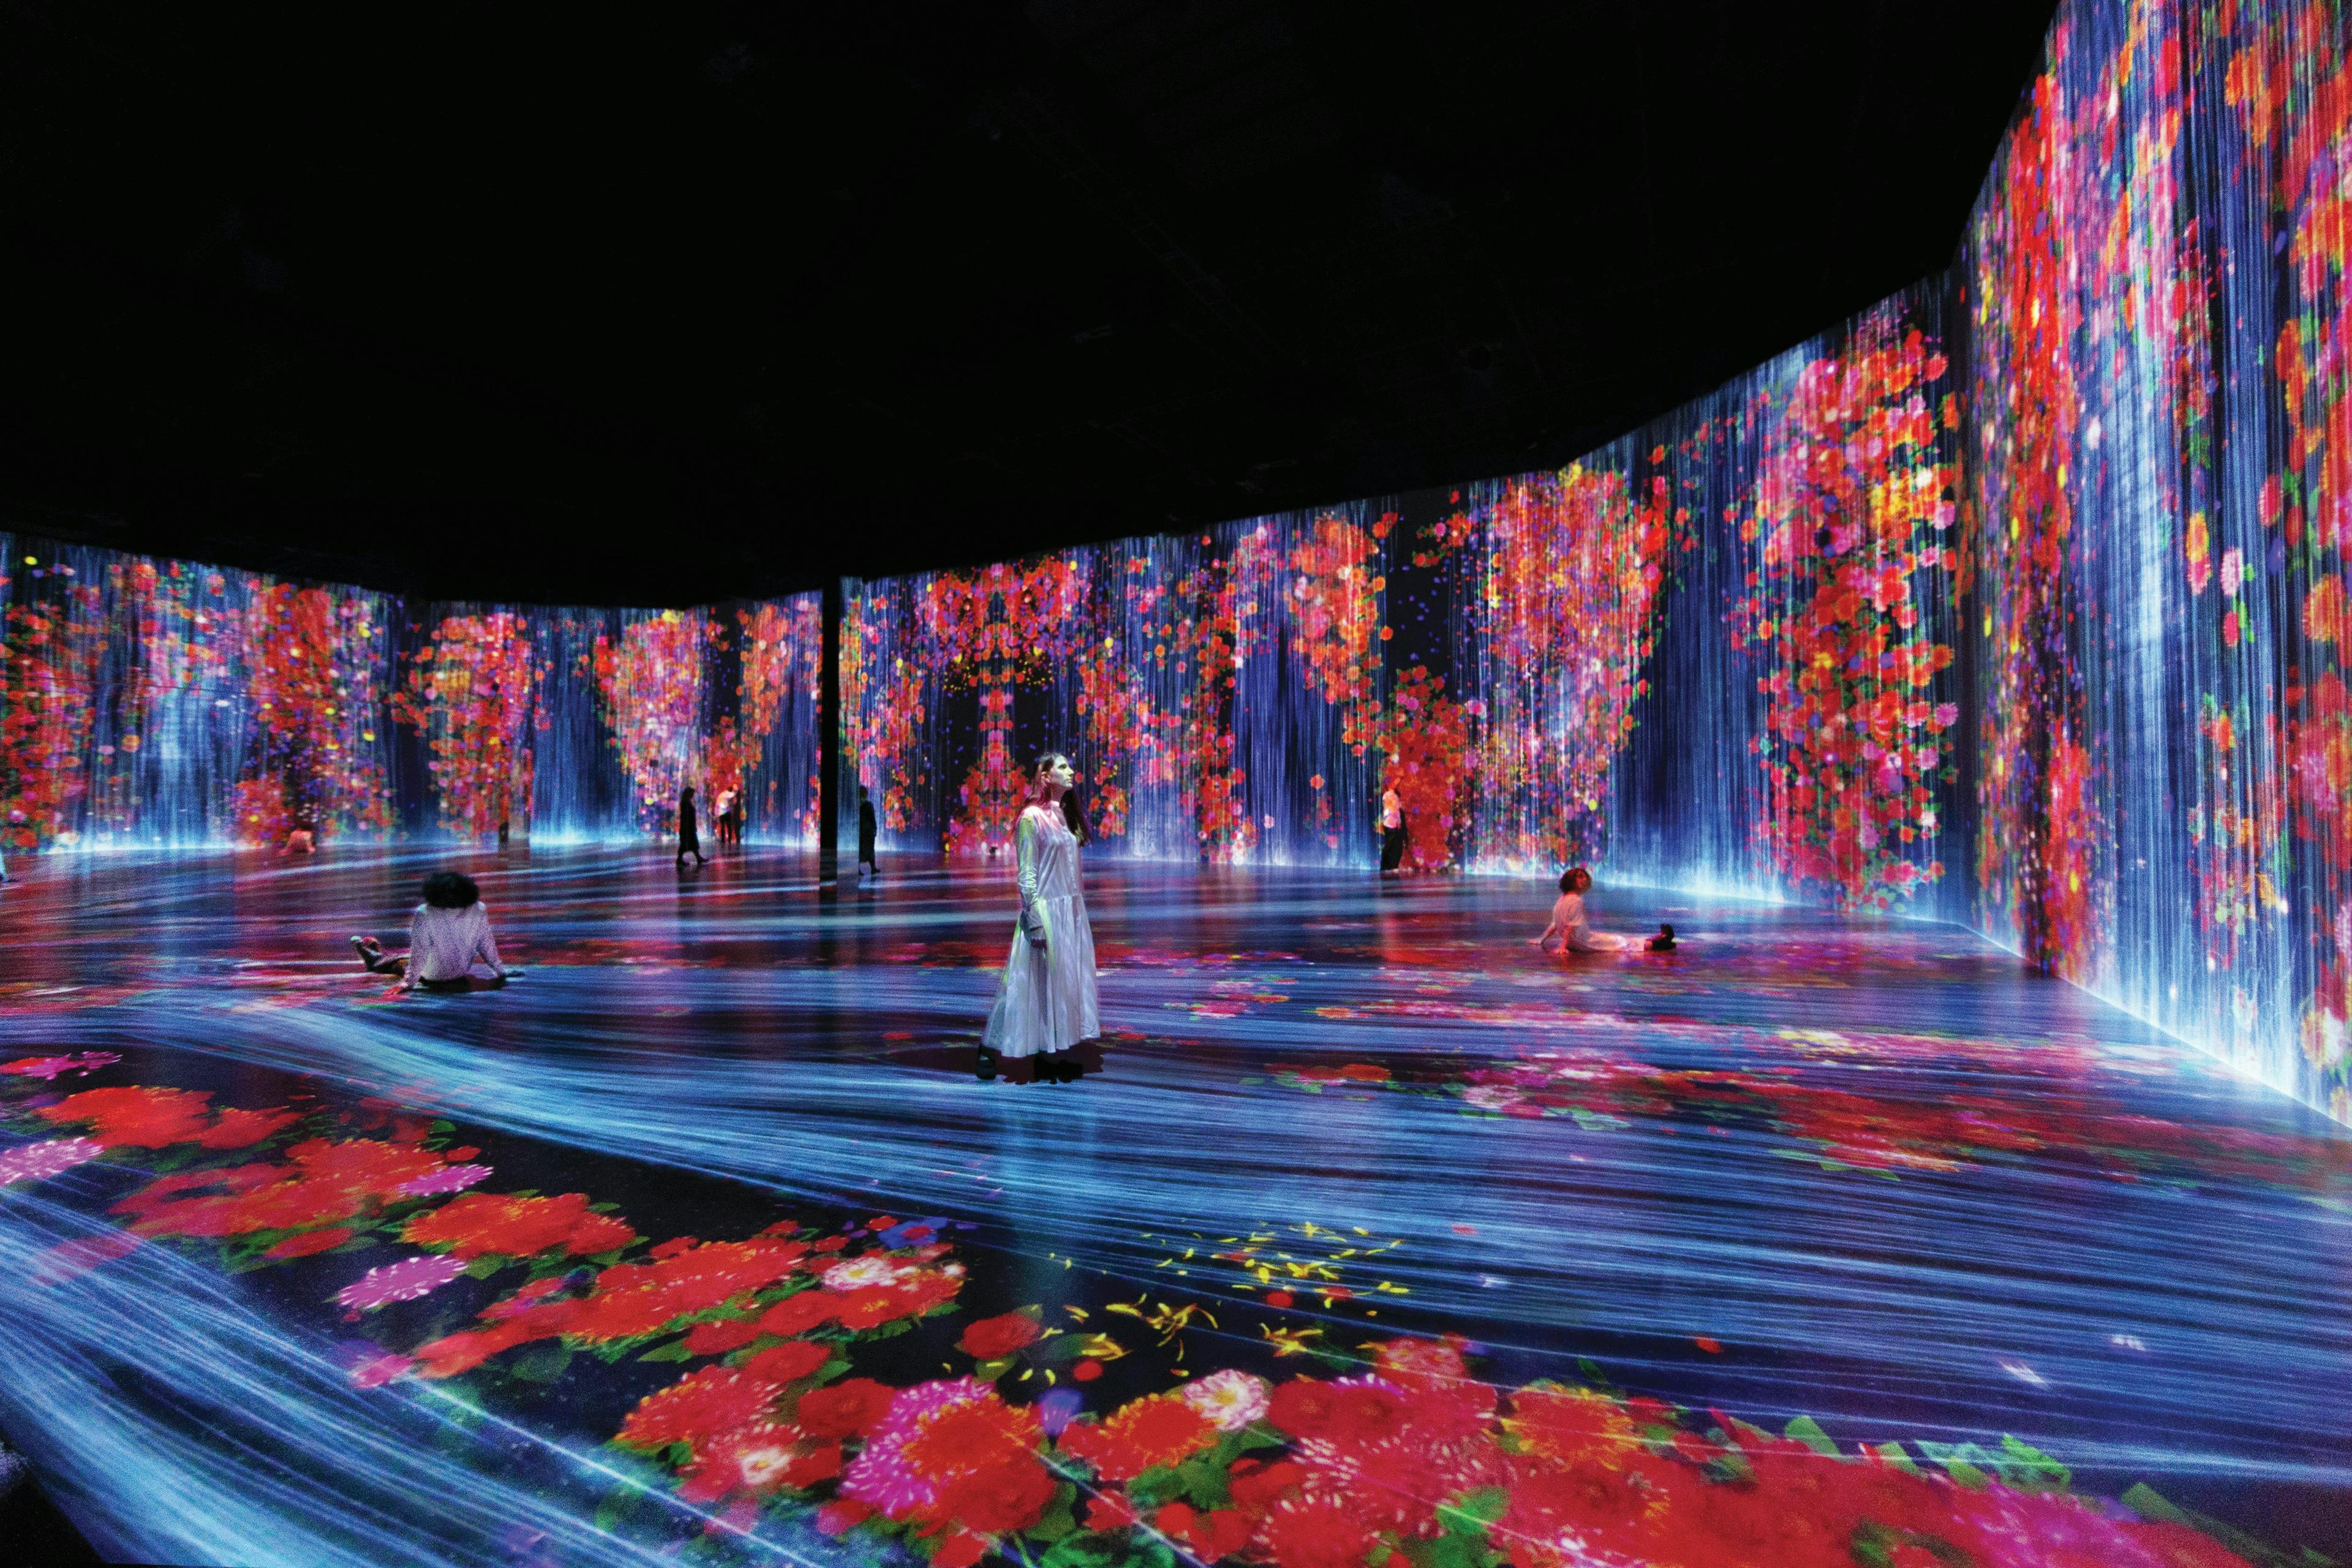 nella foto ”Flowers and People, Cannot be Controlled but Live Together–Transcending Boundaries, A Whole Year per Hour,” 2017, by teamLab. Installation view of Every Wall is a Door, Superblue Miami, 2021. © teamLab. Courtesy of Pace Gallery.